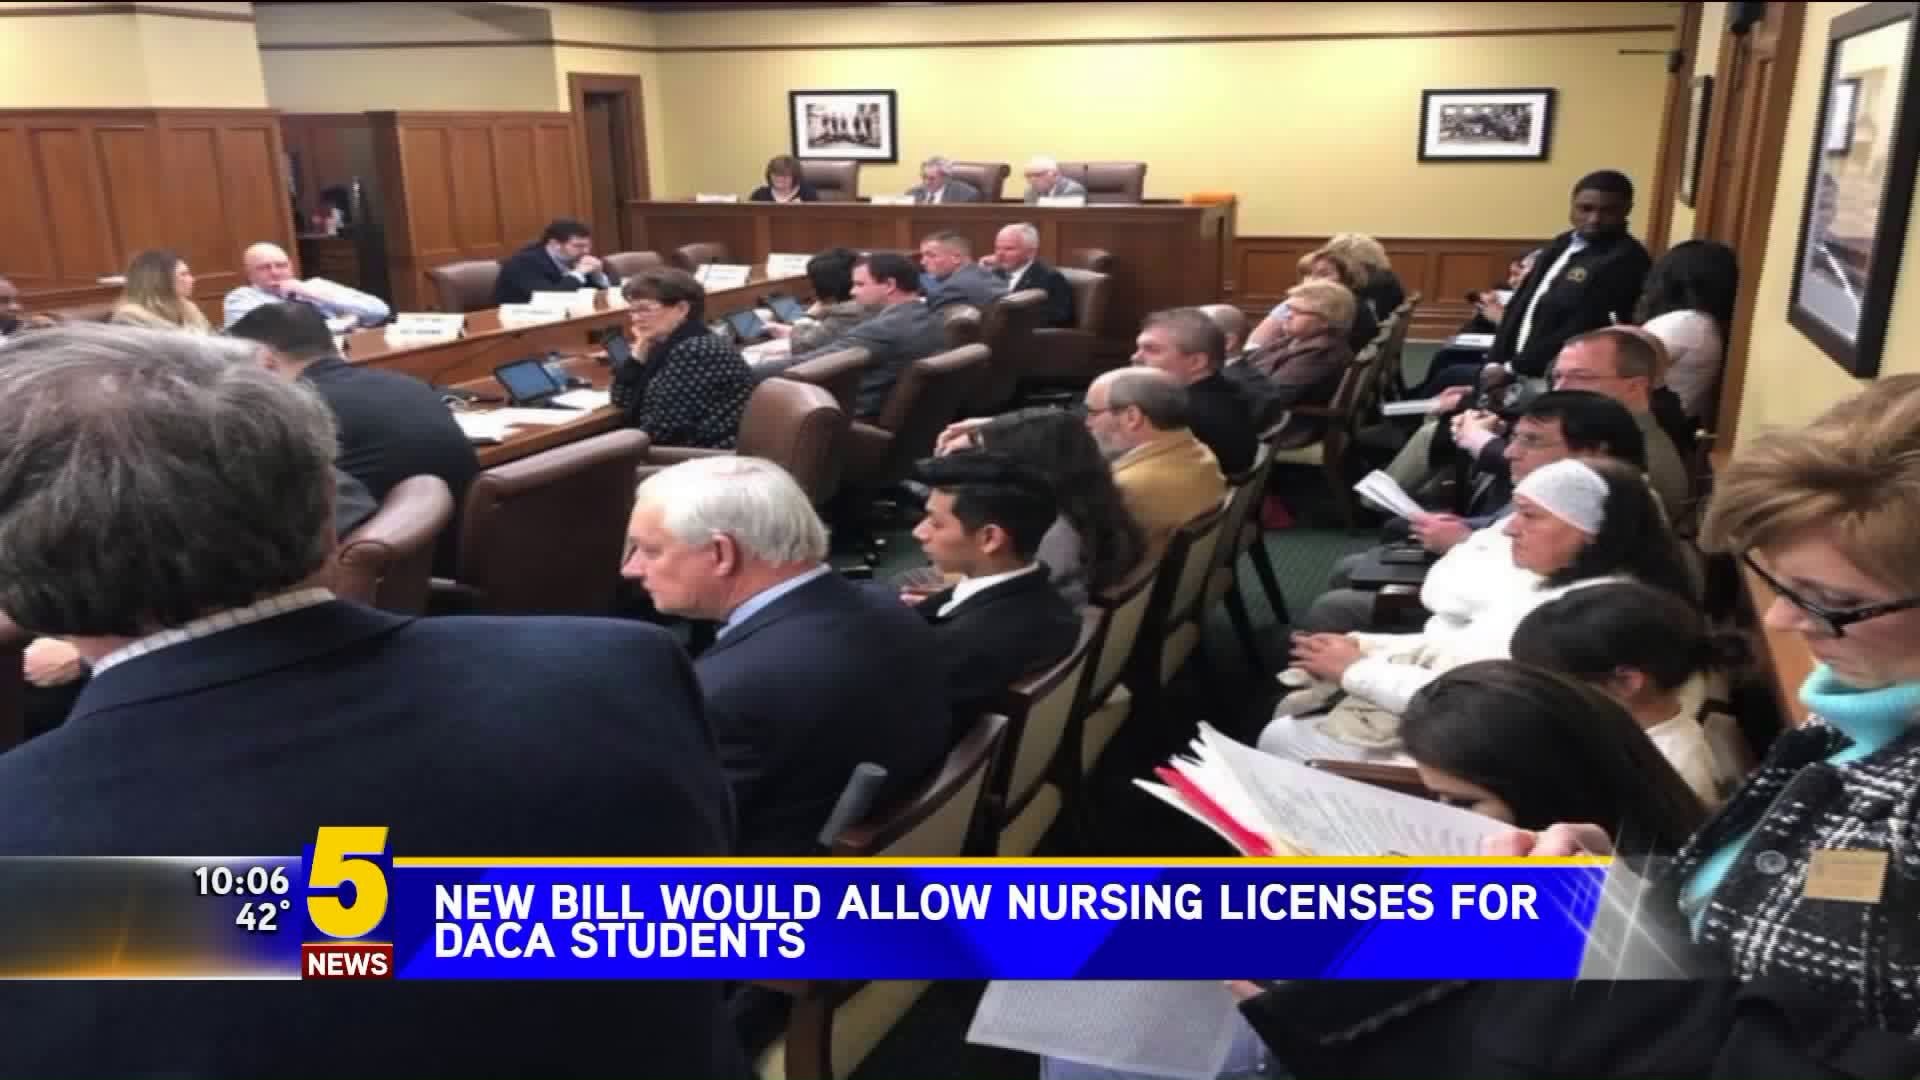 New Bill Would Allow Nursing Licenses For DACA Students